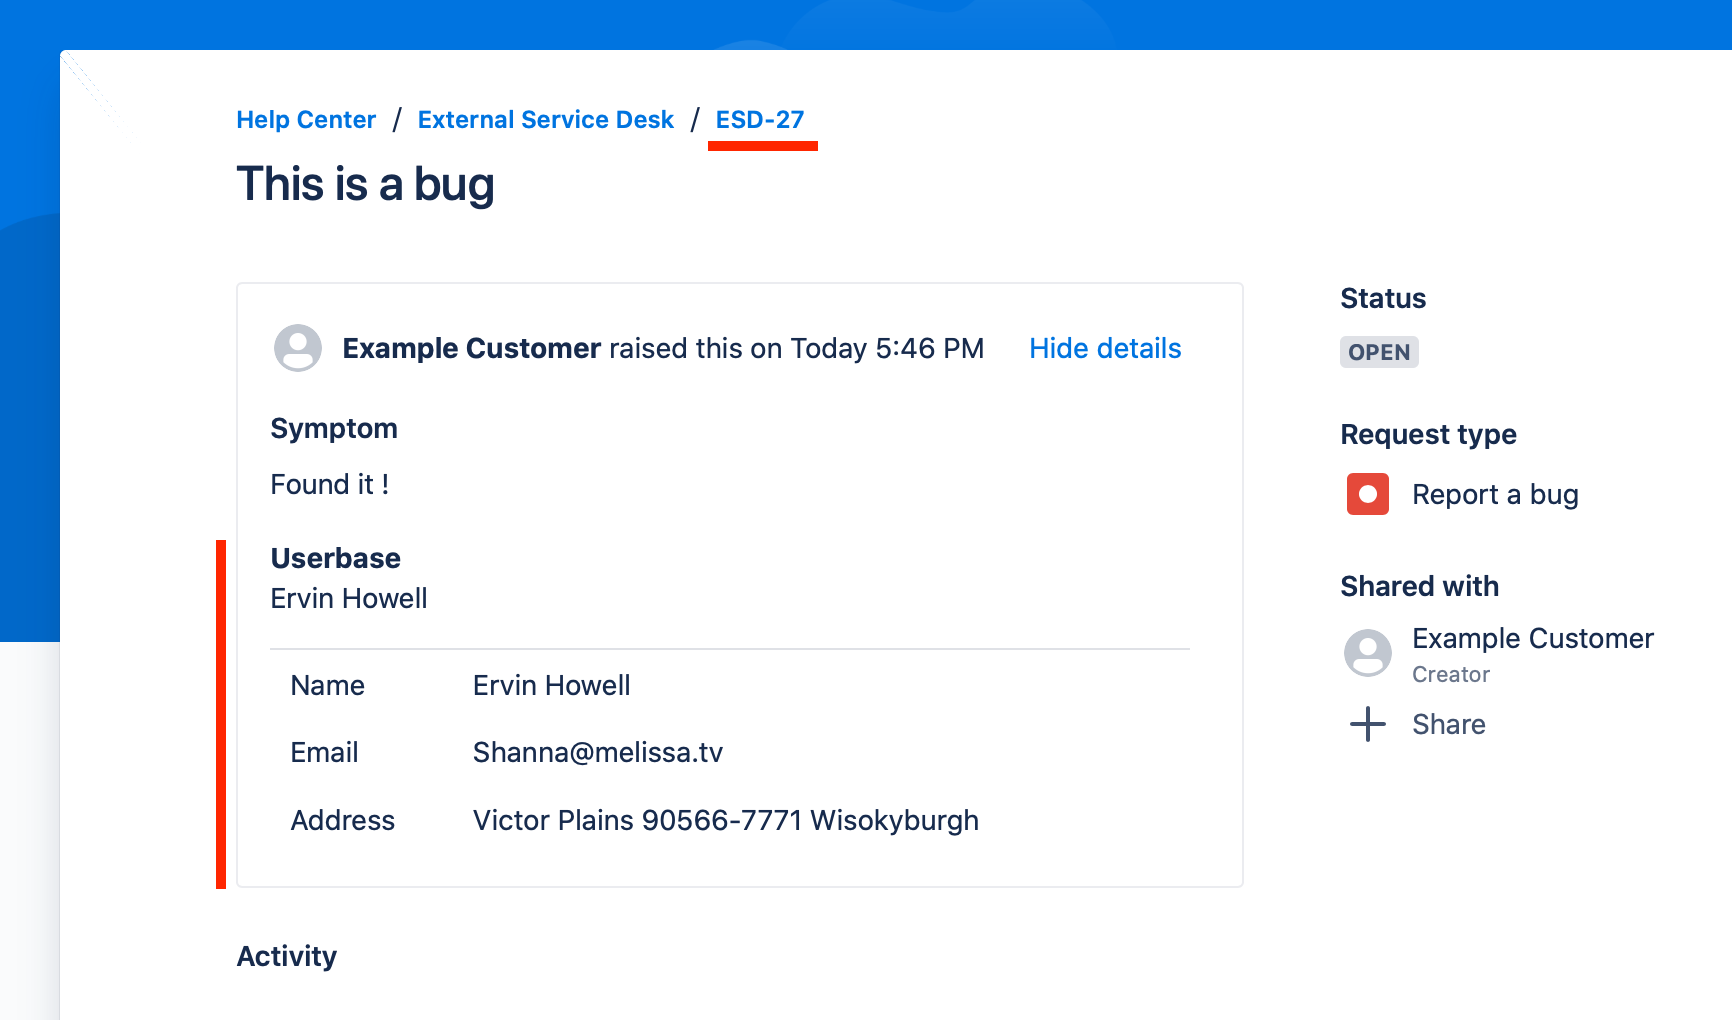 Example how it looks in the customer issue view